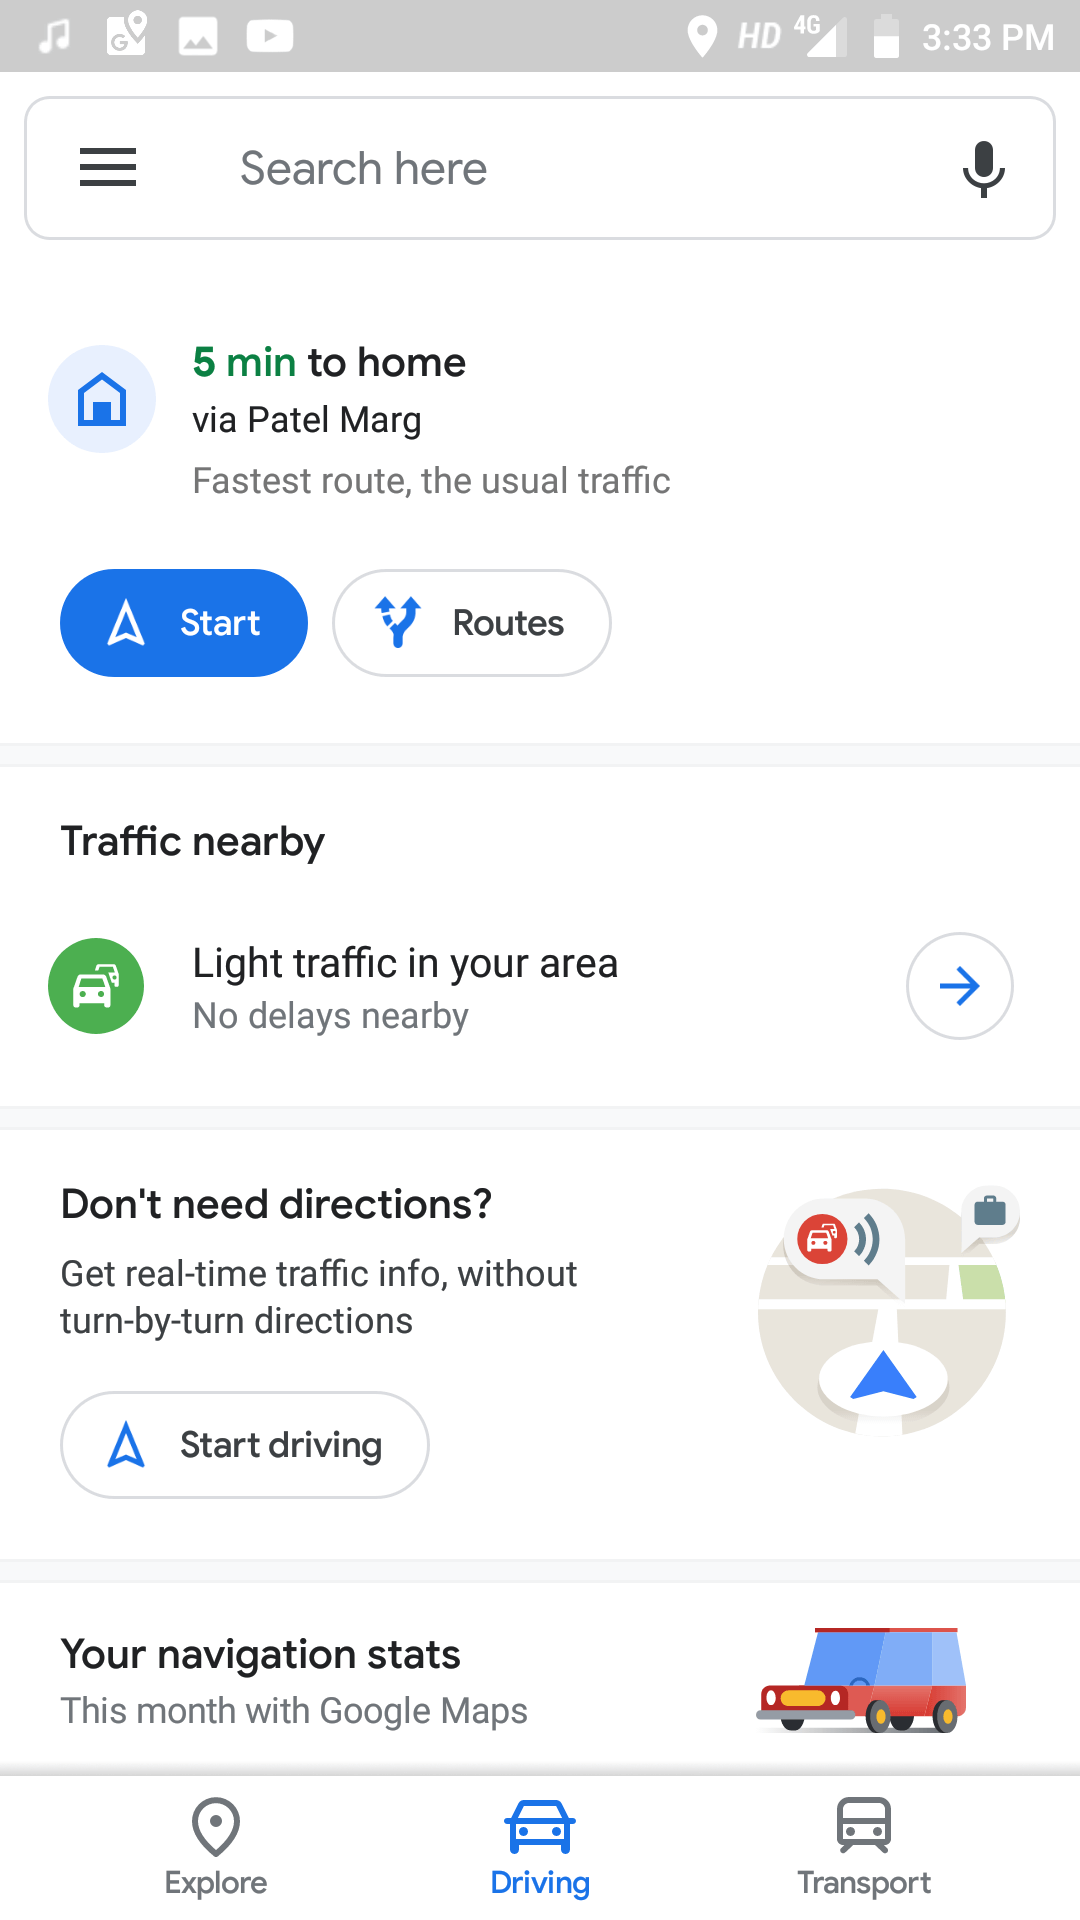 Driving by Google Maps